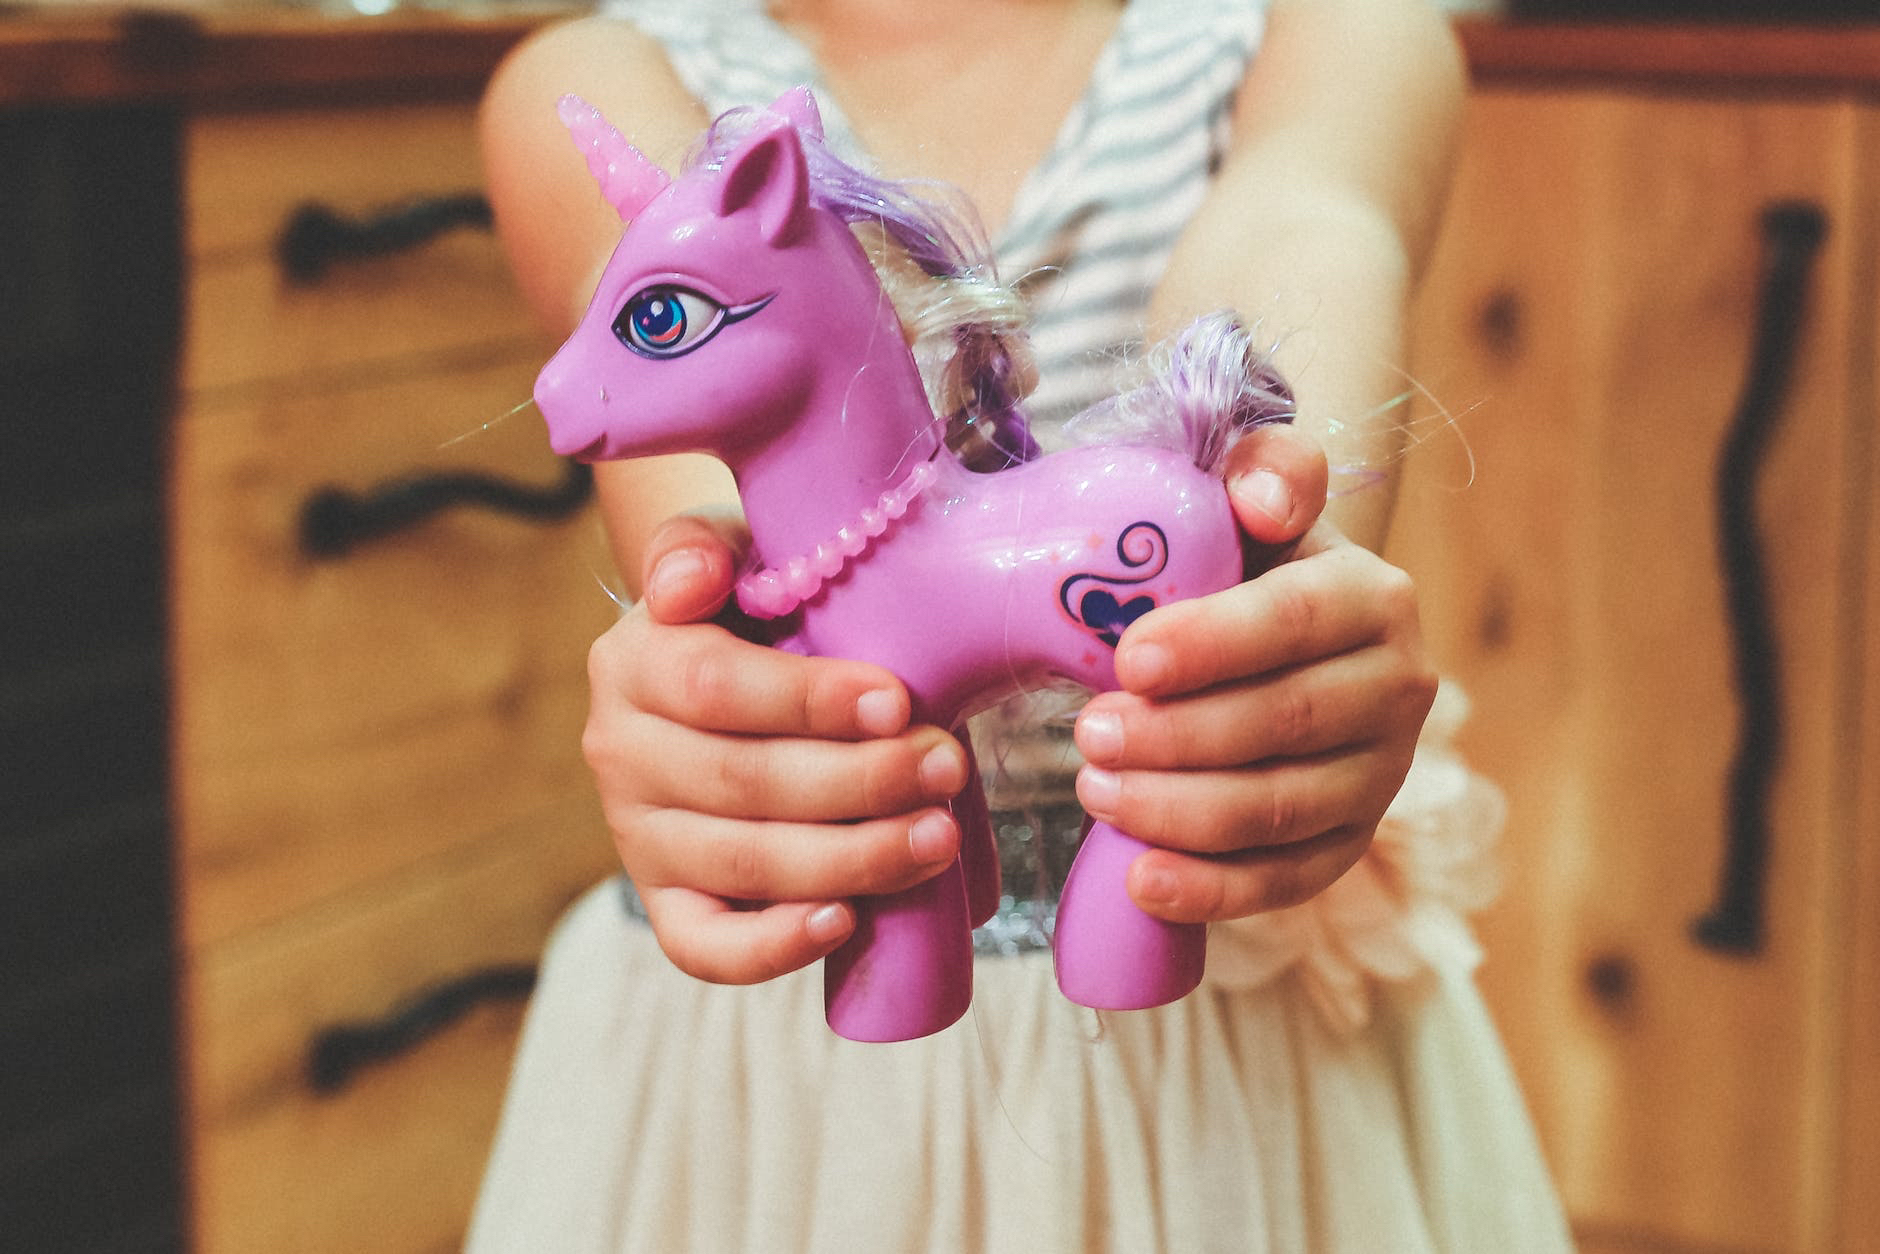 Unicorn Chasing at Microsoft: An Odyssey of Psychological Safety in the Workplace